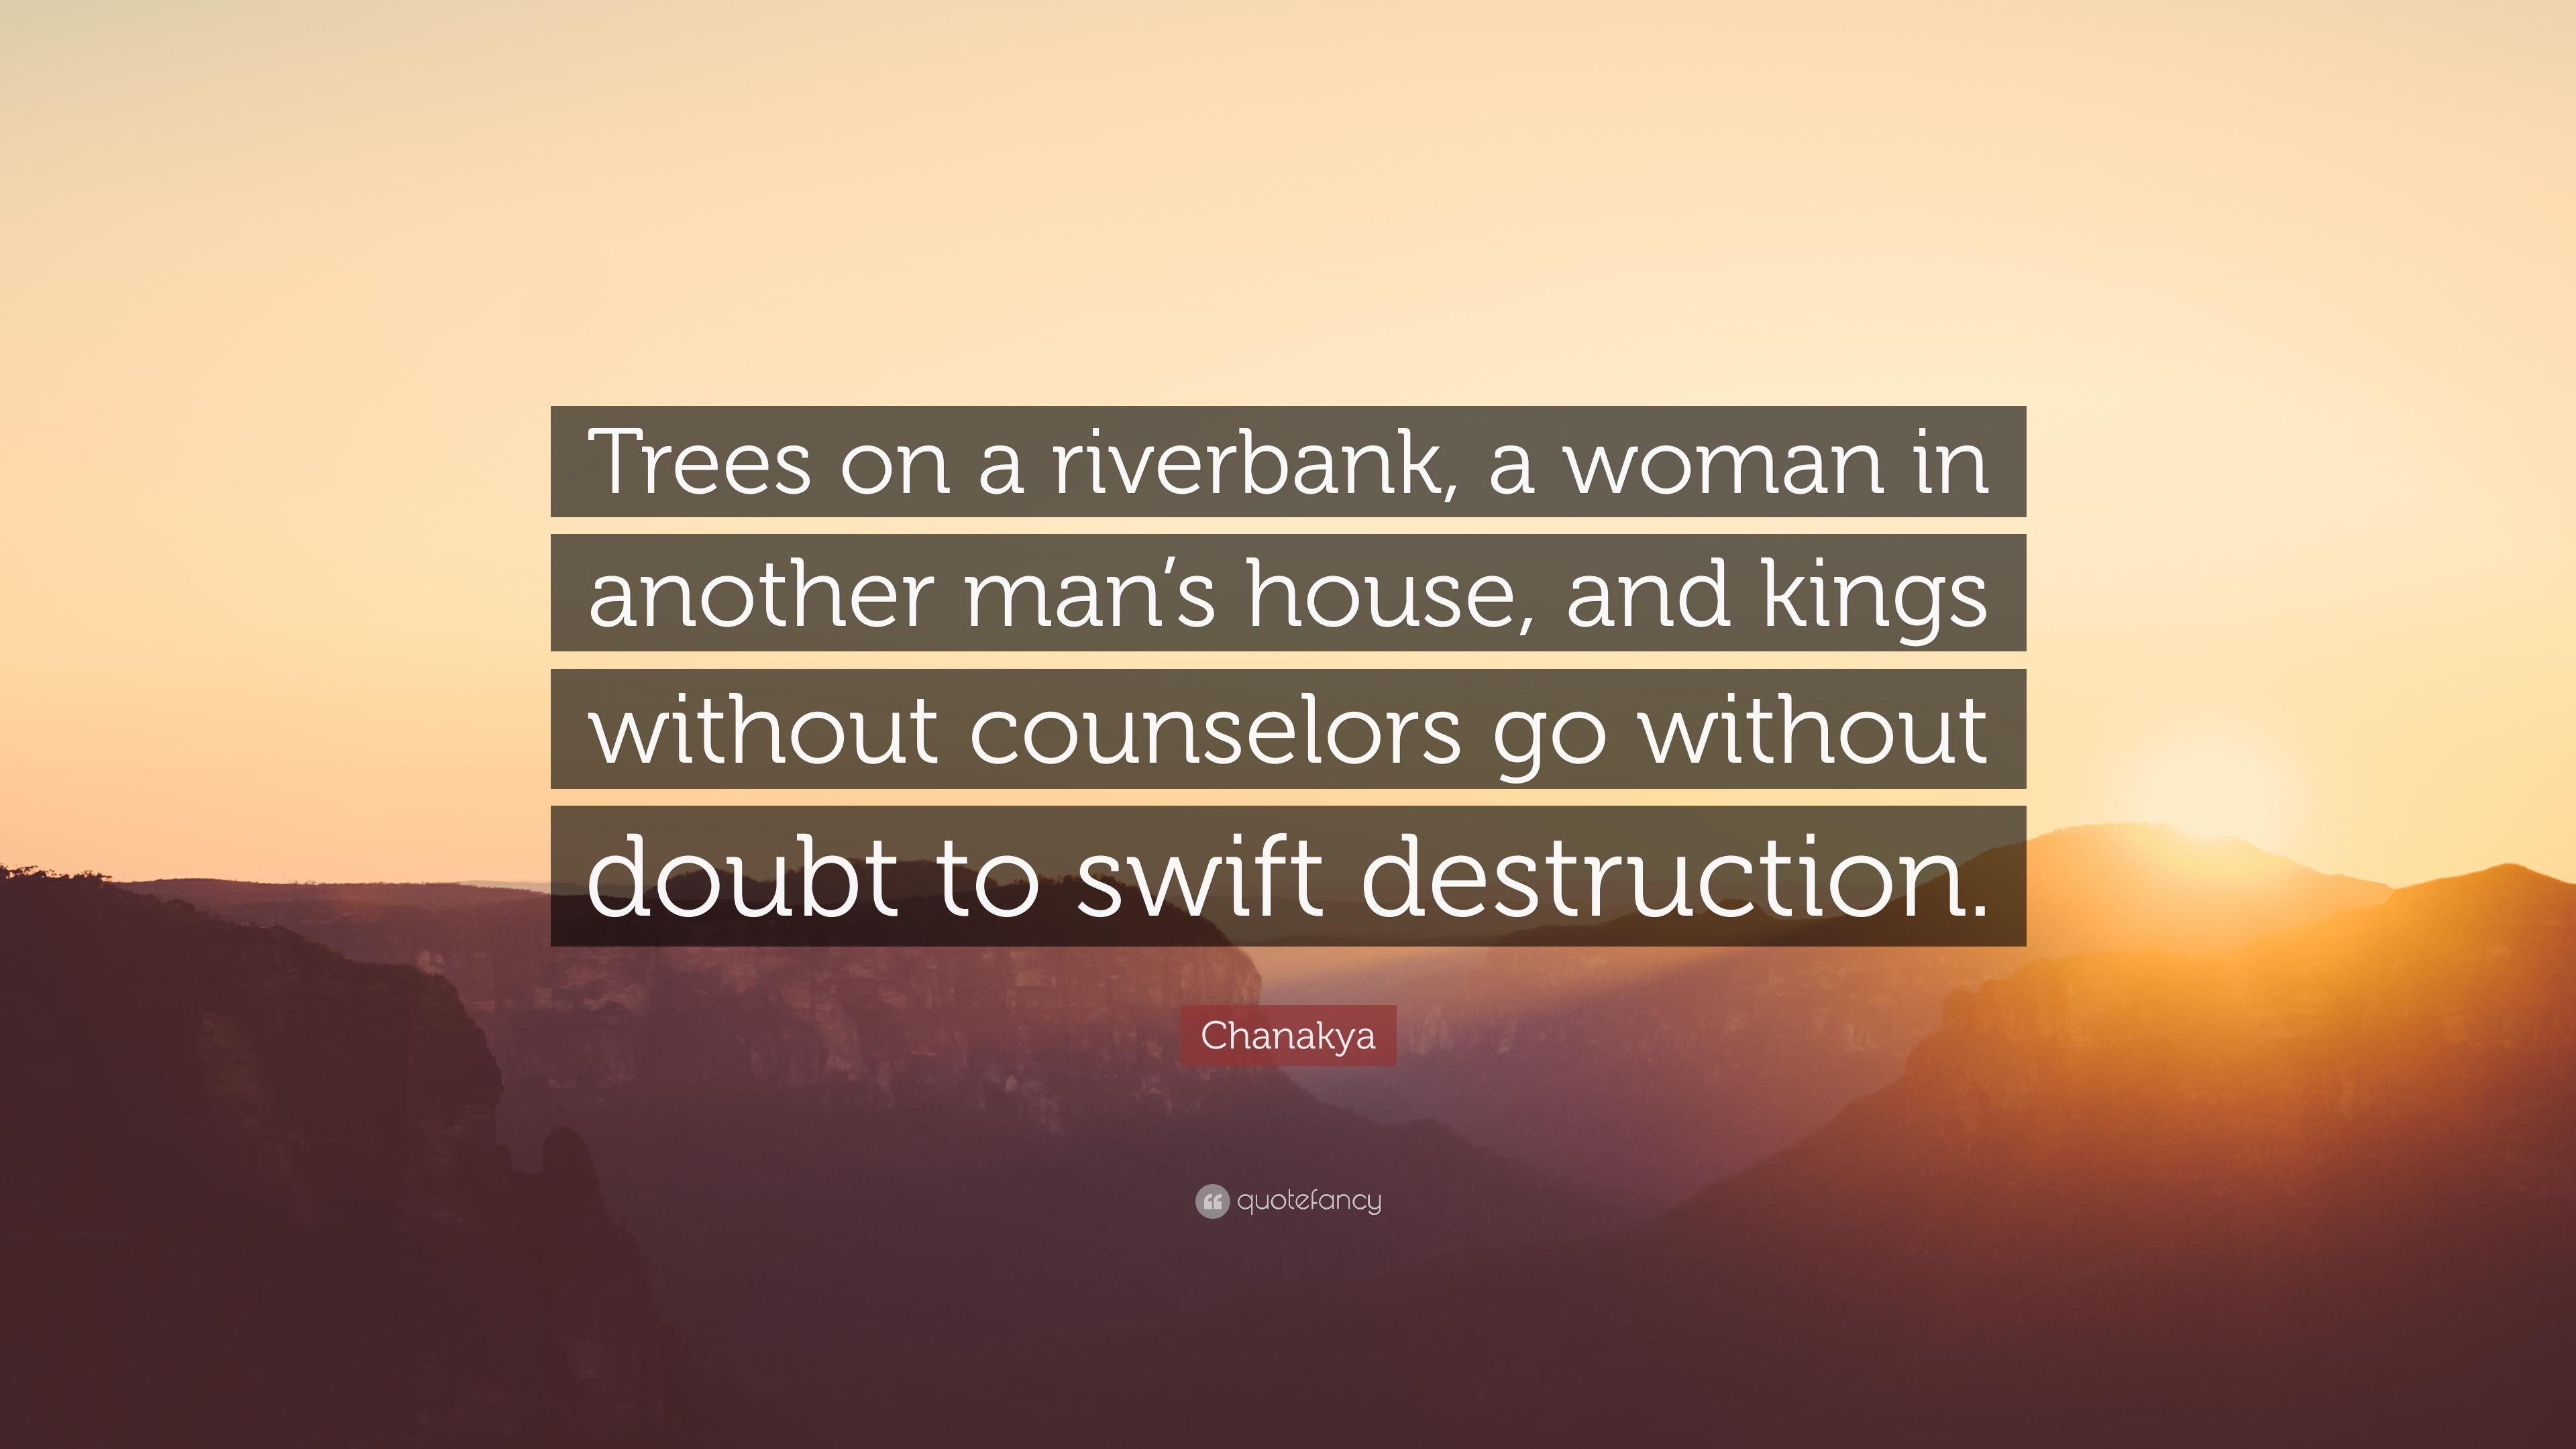 Chanakya Quote: “Trees on a riverbank, a woman in another man's